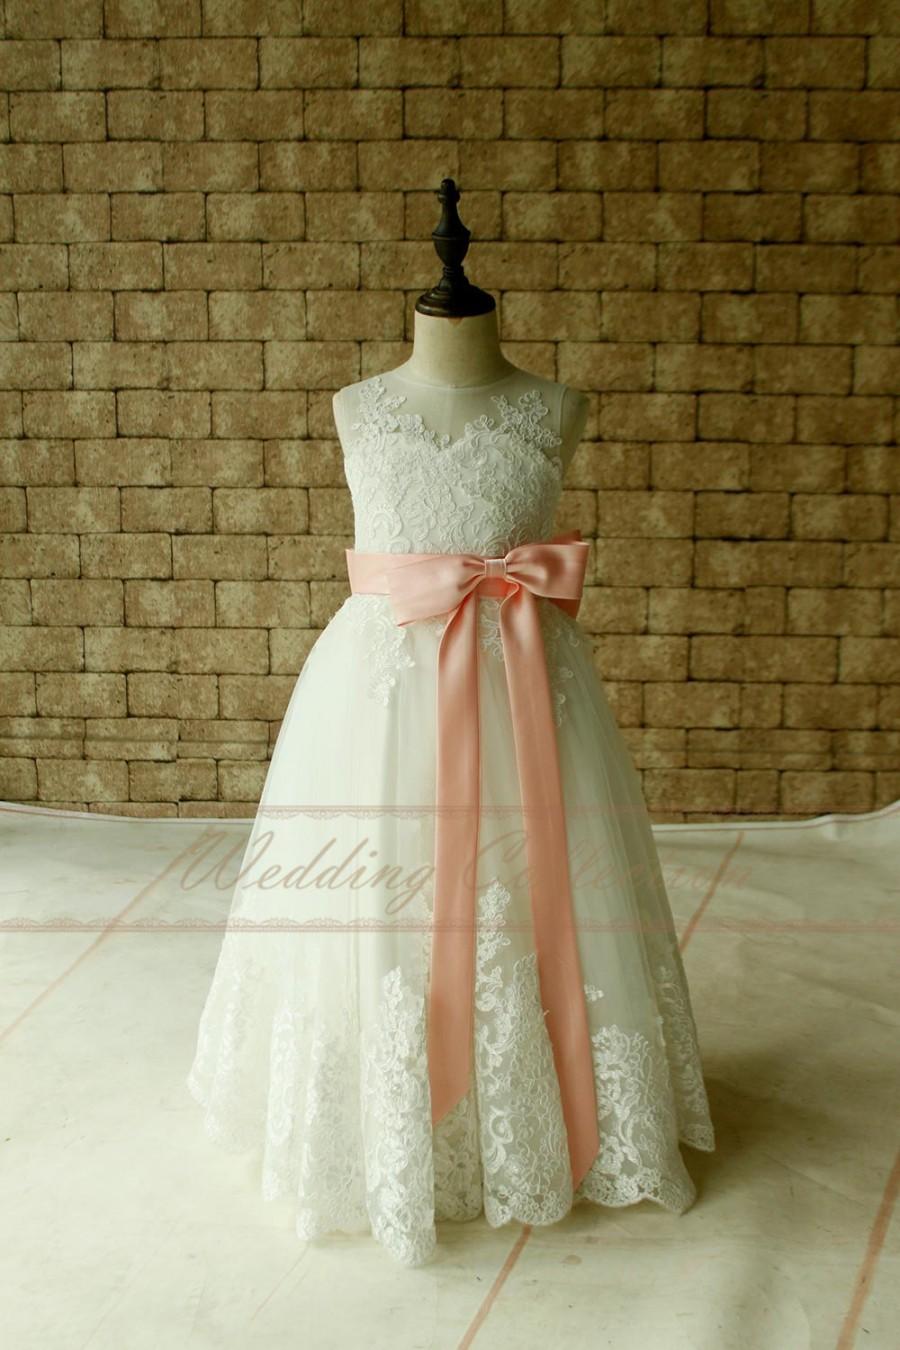 Wedding - Ivory Lace Applique Flower Girl Dress Ankle Length with Blush Pink Sash and Bow